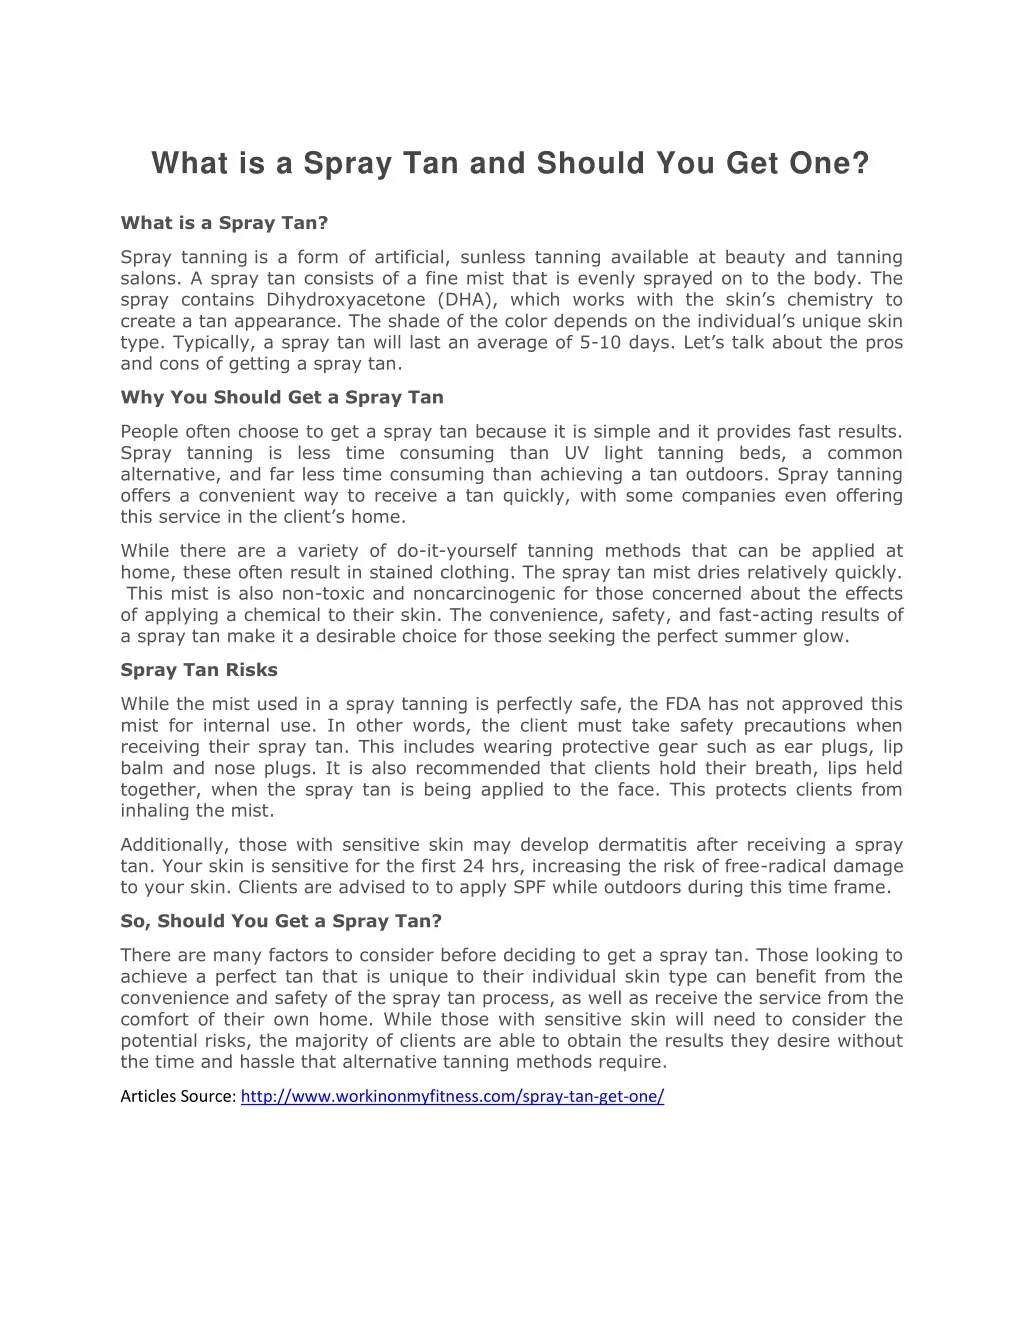 what is a spray tan and should you get one